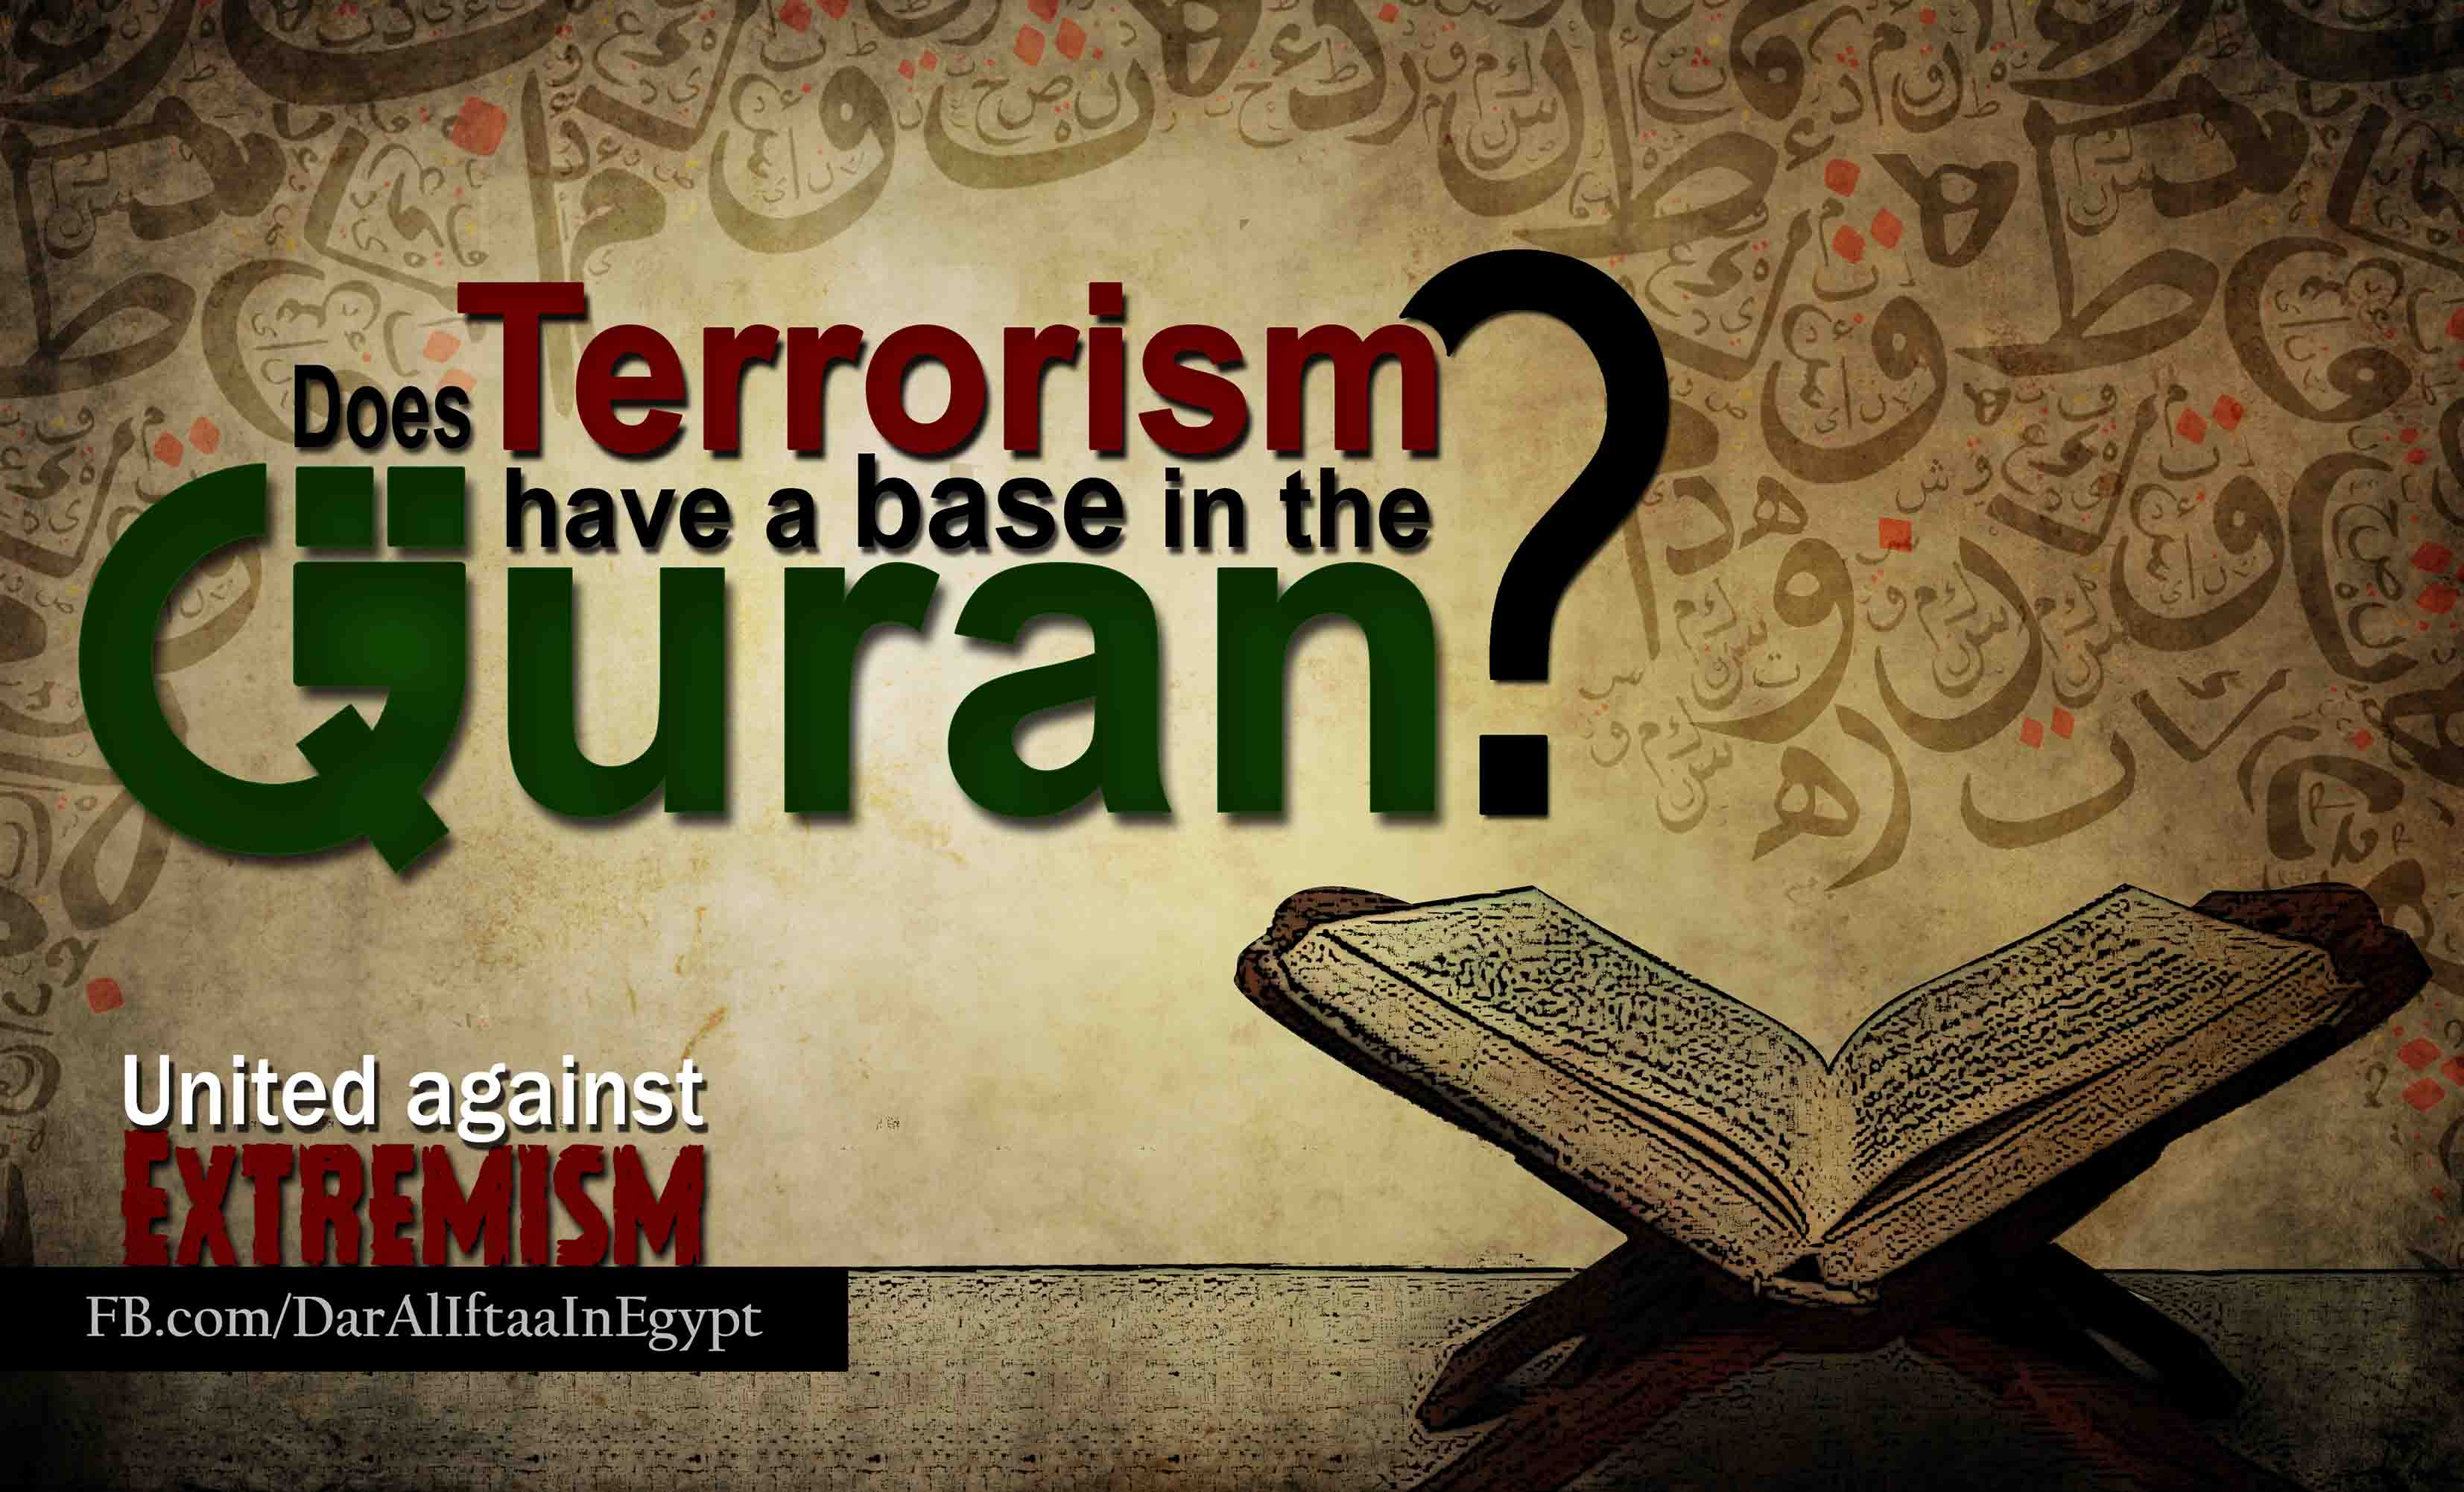 Does Terrorism find its base in the Quran?